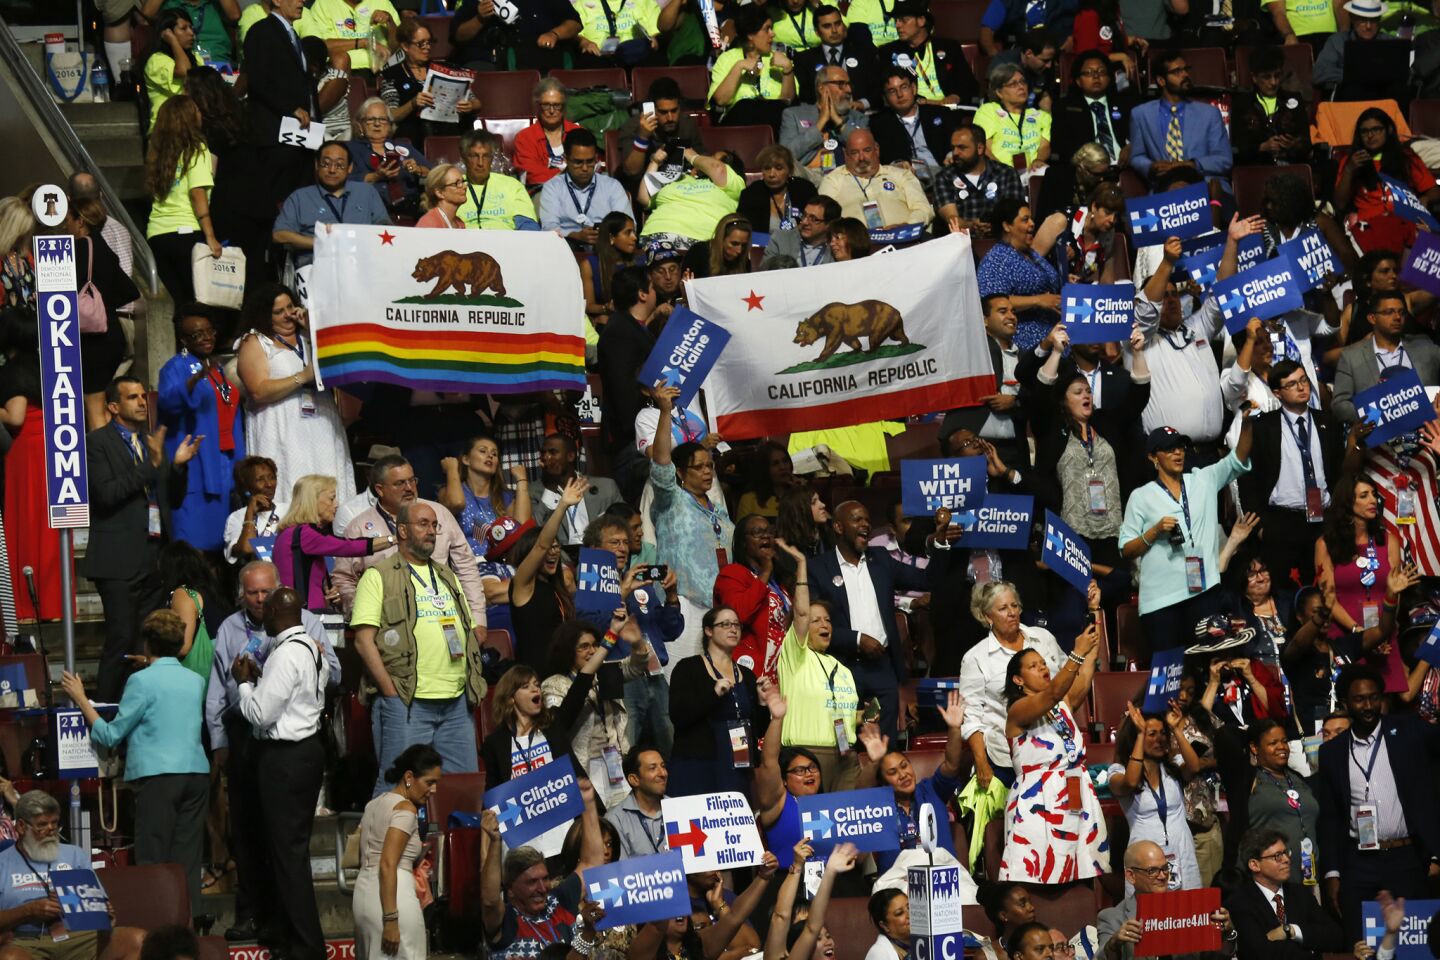 Members of the California delegation support Senator Barbara Boxer as she leaves the stage after speaking on the final night of the Democratic National Convention in Philadelphia.